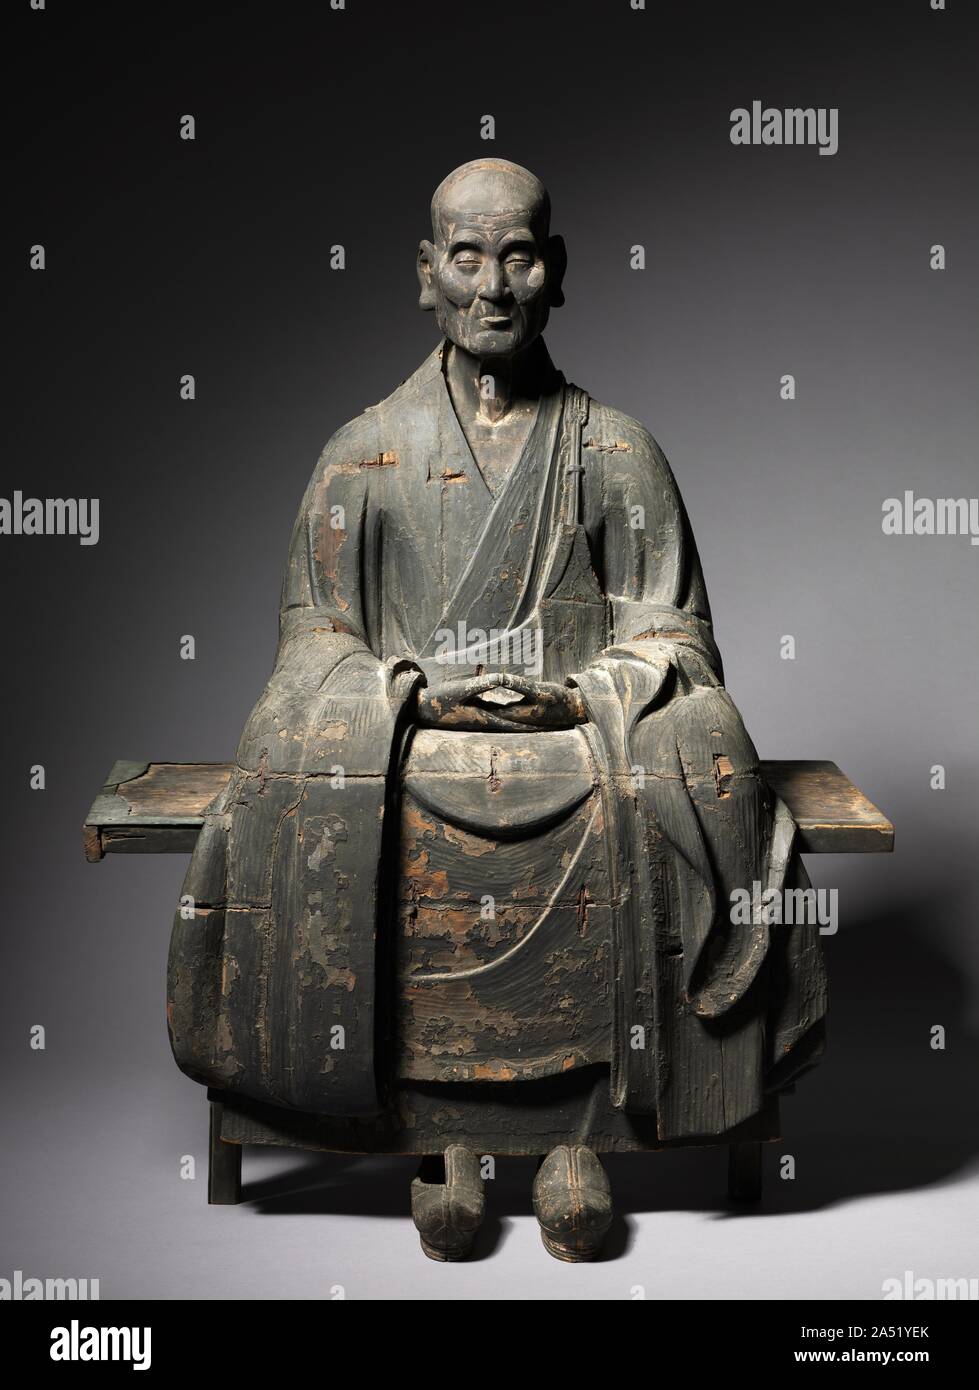 Portrait of Hotto Enmyo Kokushi, 1286-1333. Hotto Enmyo Kokushi, is a posthumous title bestowed upon the Zen Buddhist monk Shinchi Kakushin (1203-1298) by the emperor Go-Daigo. The title means &quot;perfectly awakened national teacher of the Dharma lamp.&quot; Compared with two sculptures of the monk created during his lifetime (both in and around 1275), this sculpture portrays Kakushin as a much older man. It comprises multiple wood blocks, with the main parts being the front, back, and the head, which is inserted into the body. Although only the lacquer remains today, the sculpture would onc Stock Photo